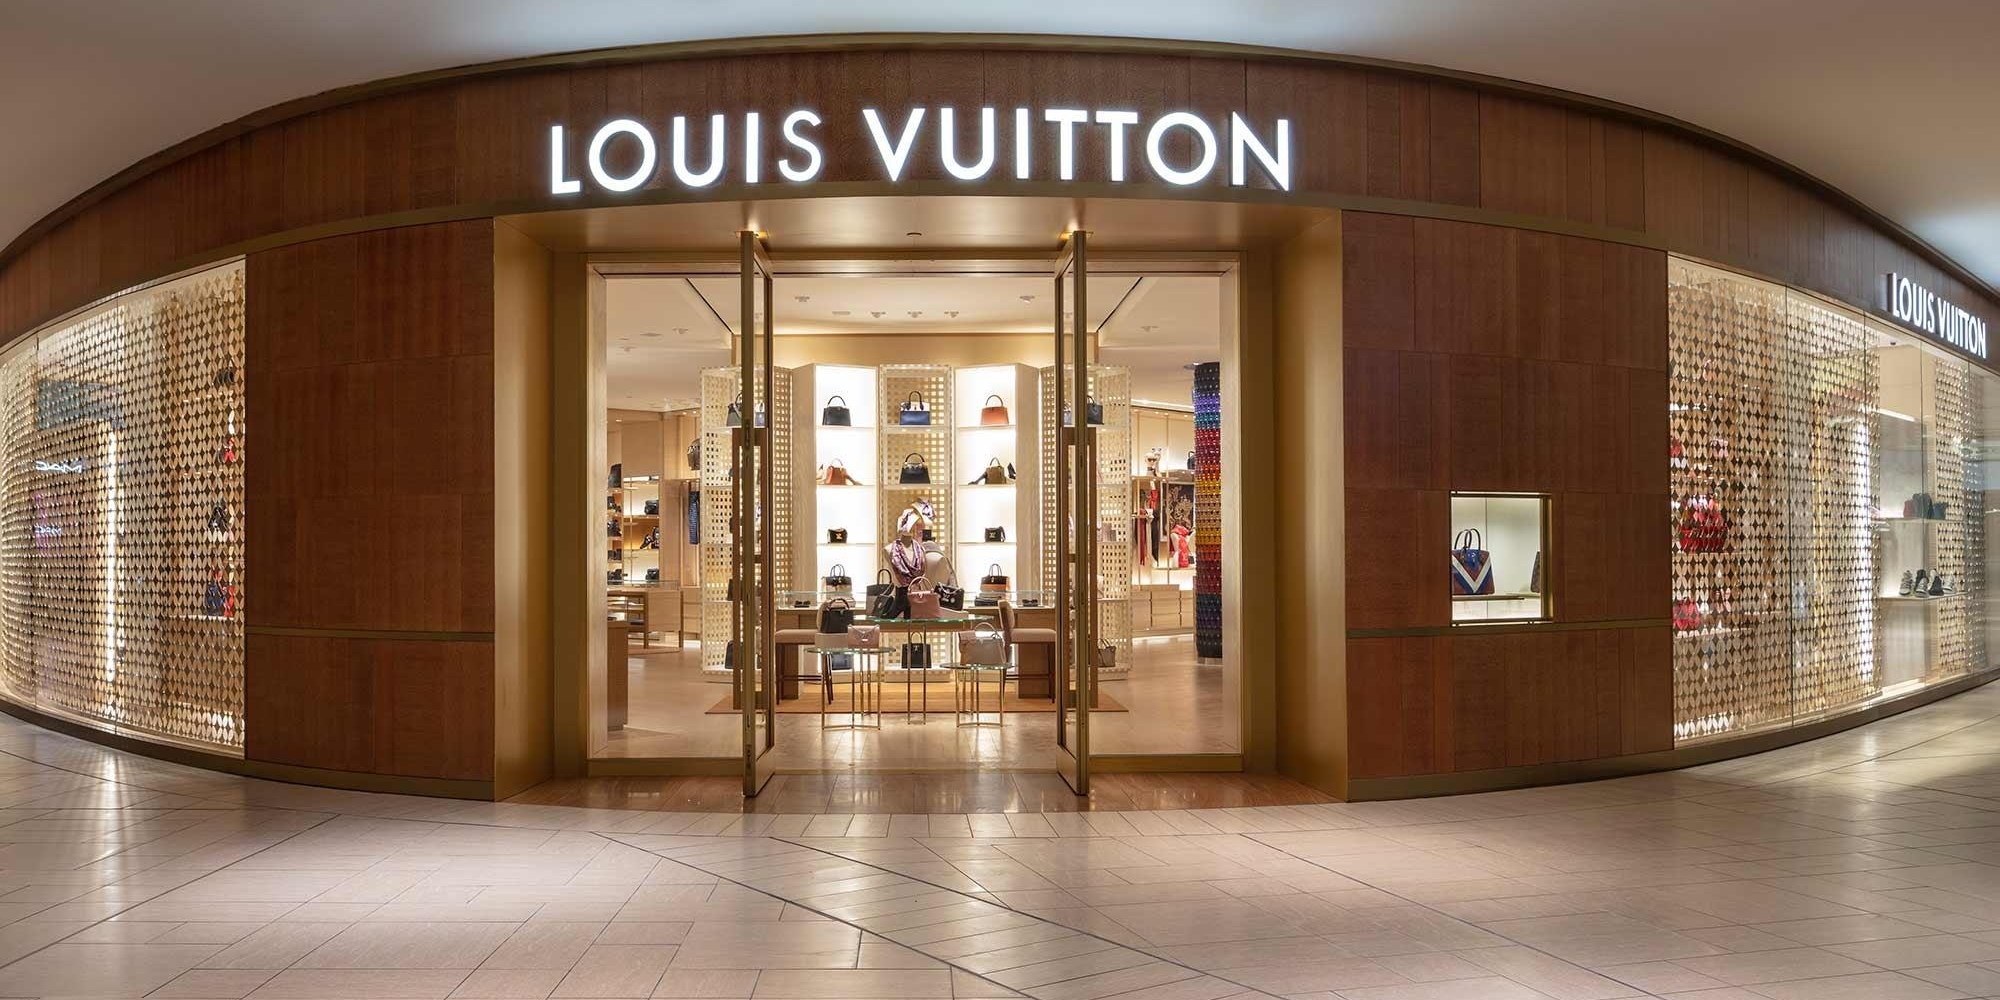 Indonesian Woman Arrested in Melbourne for Stealing Louis Vuitton Bag Worth Hundreds of Millions of Rupiah